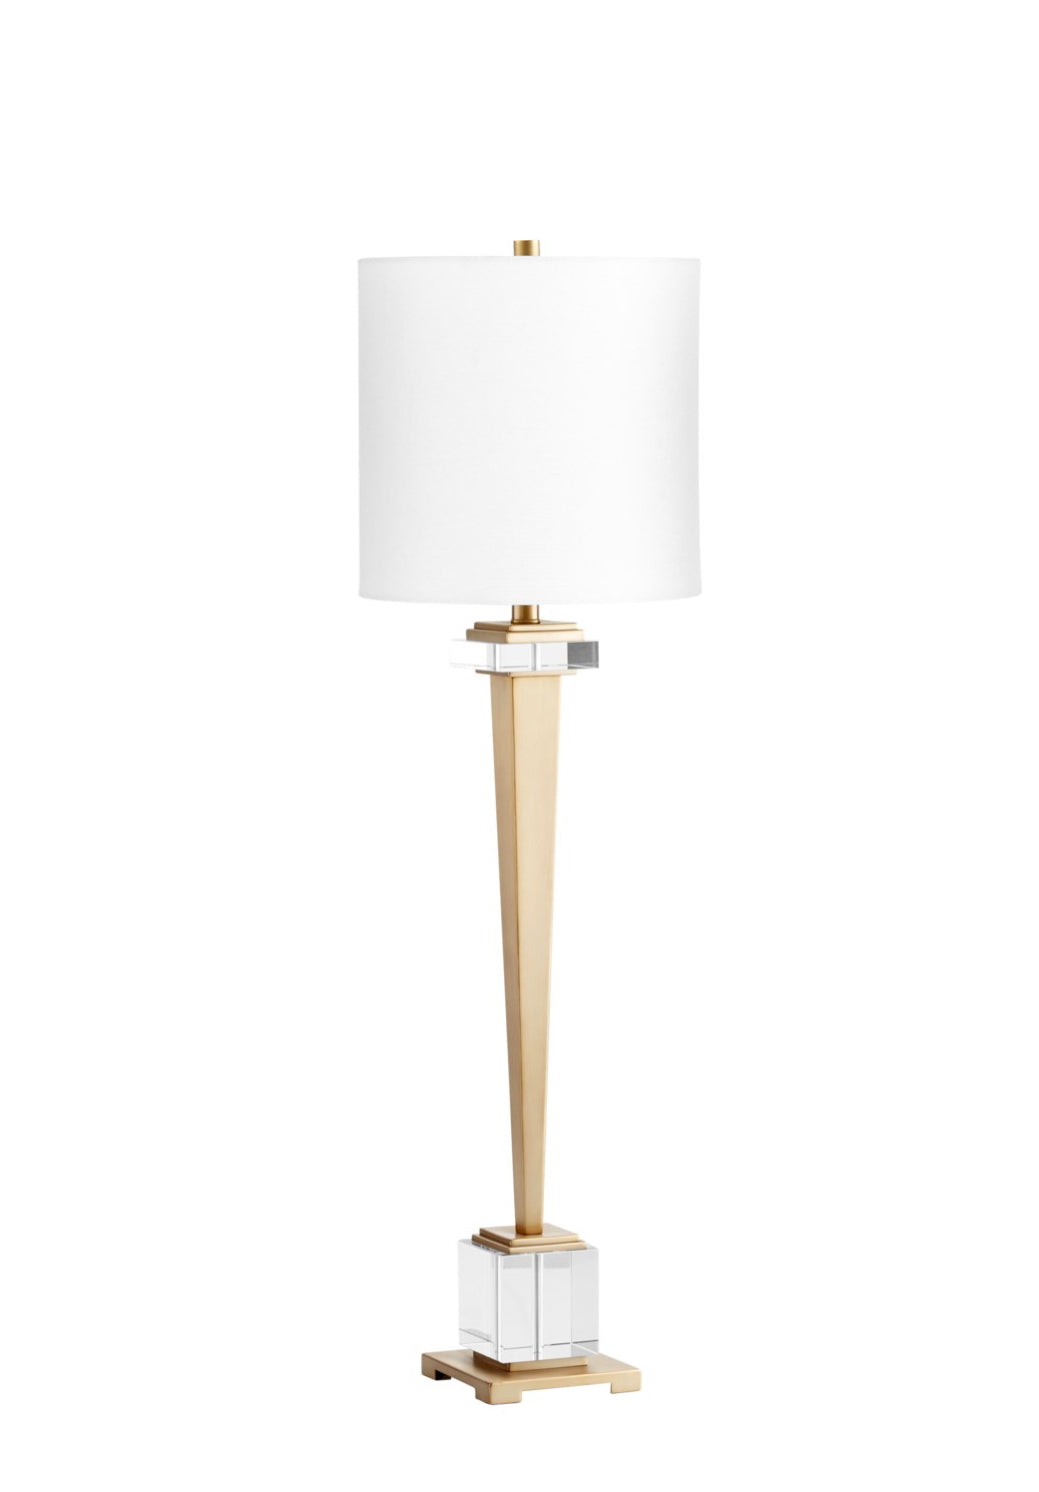 Gold Candle Stick- Statuette table lamp